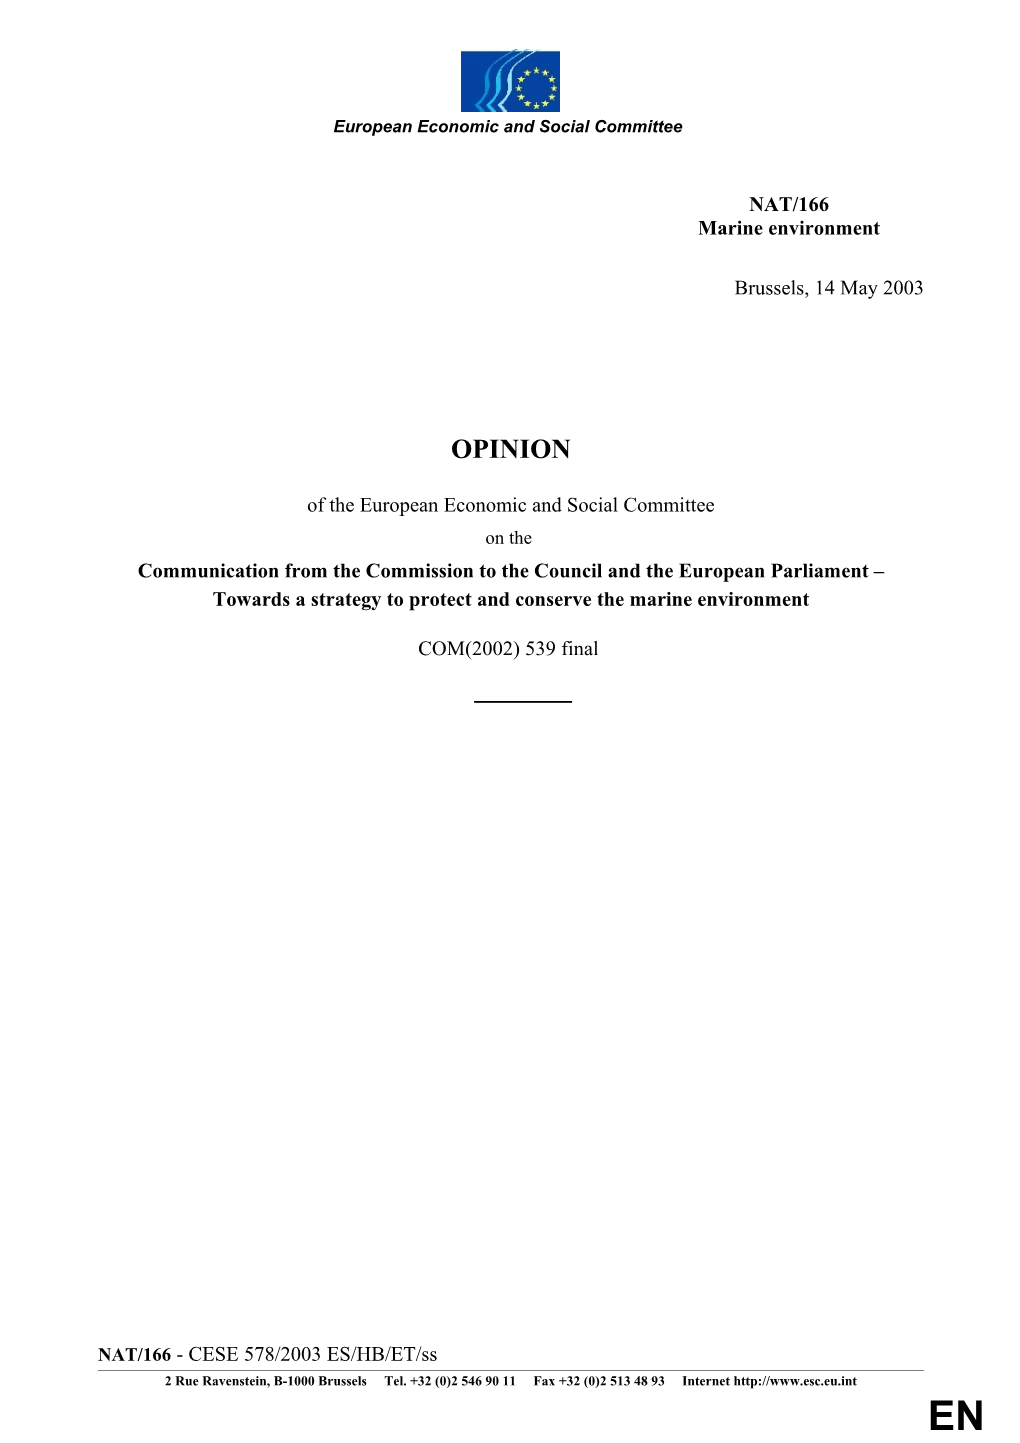 Committee Opinion CES578-2003 AC EN